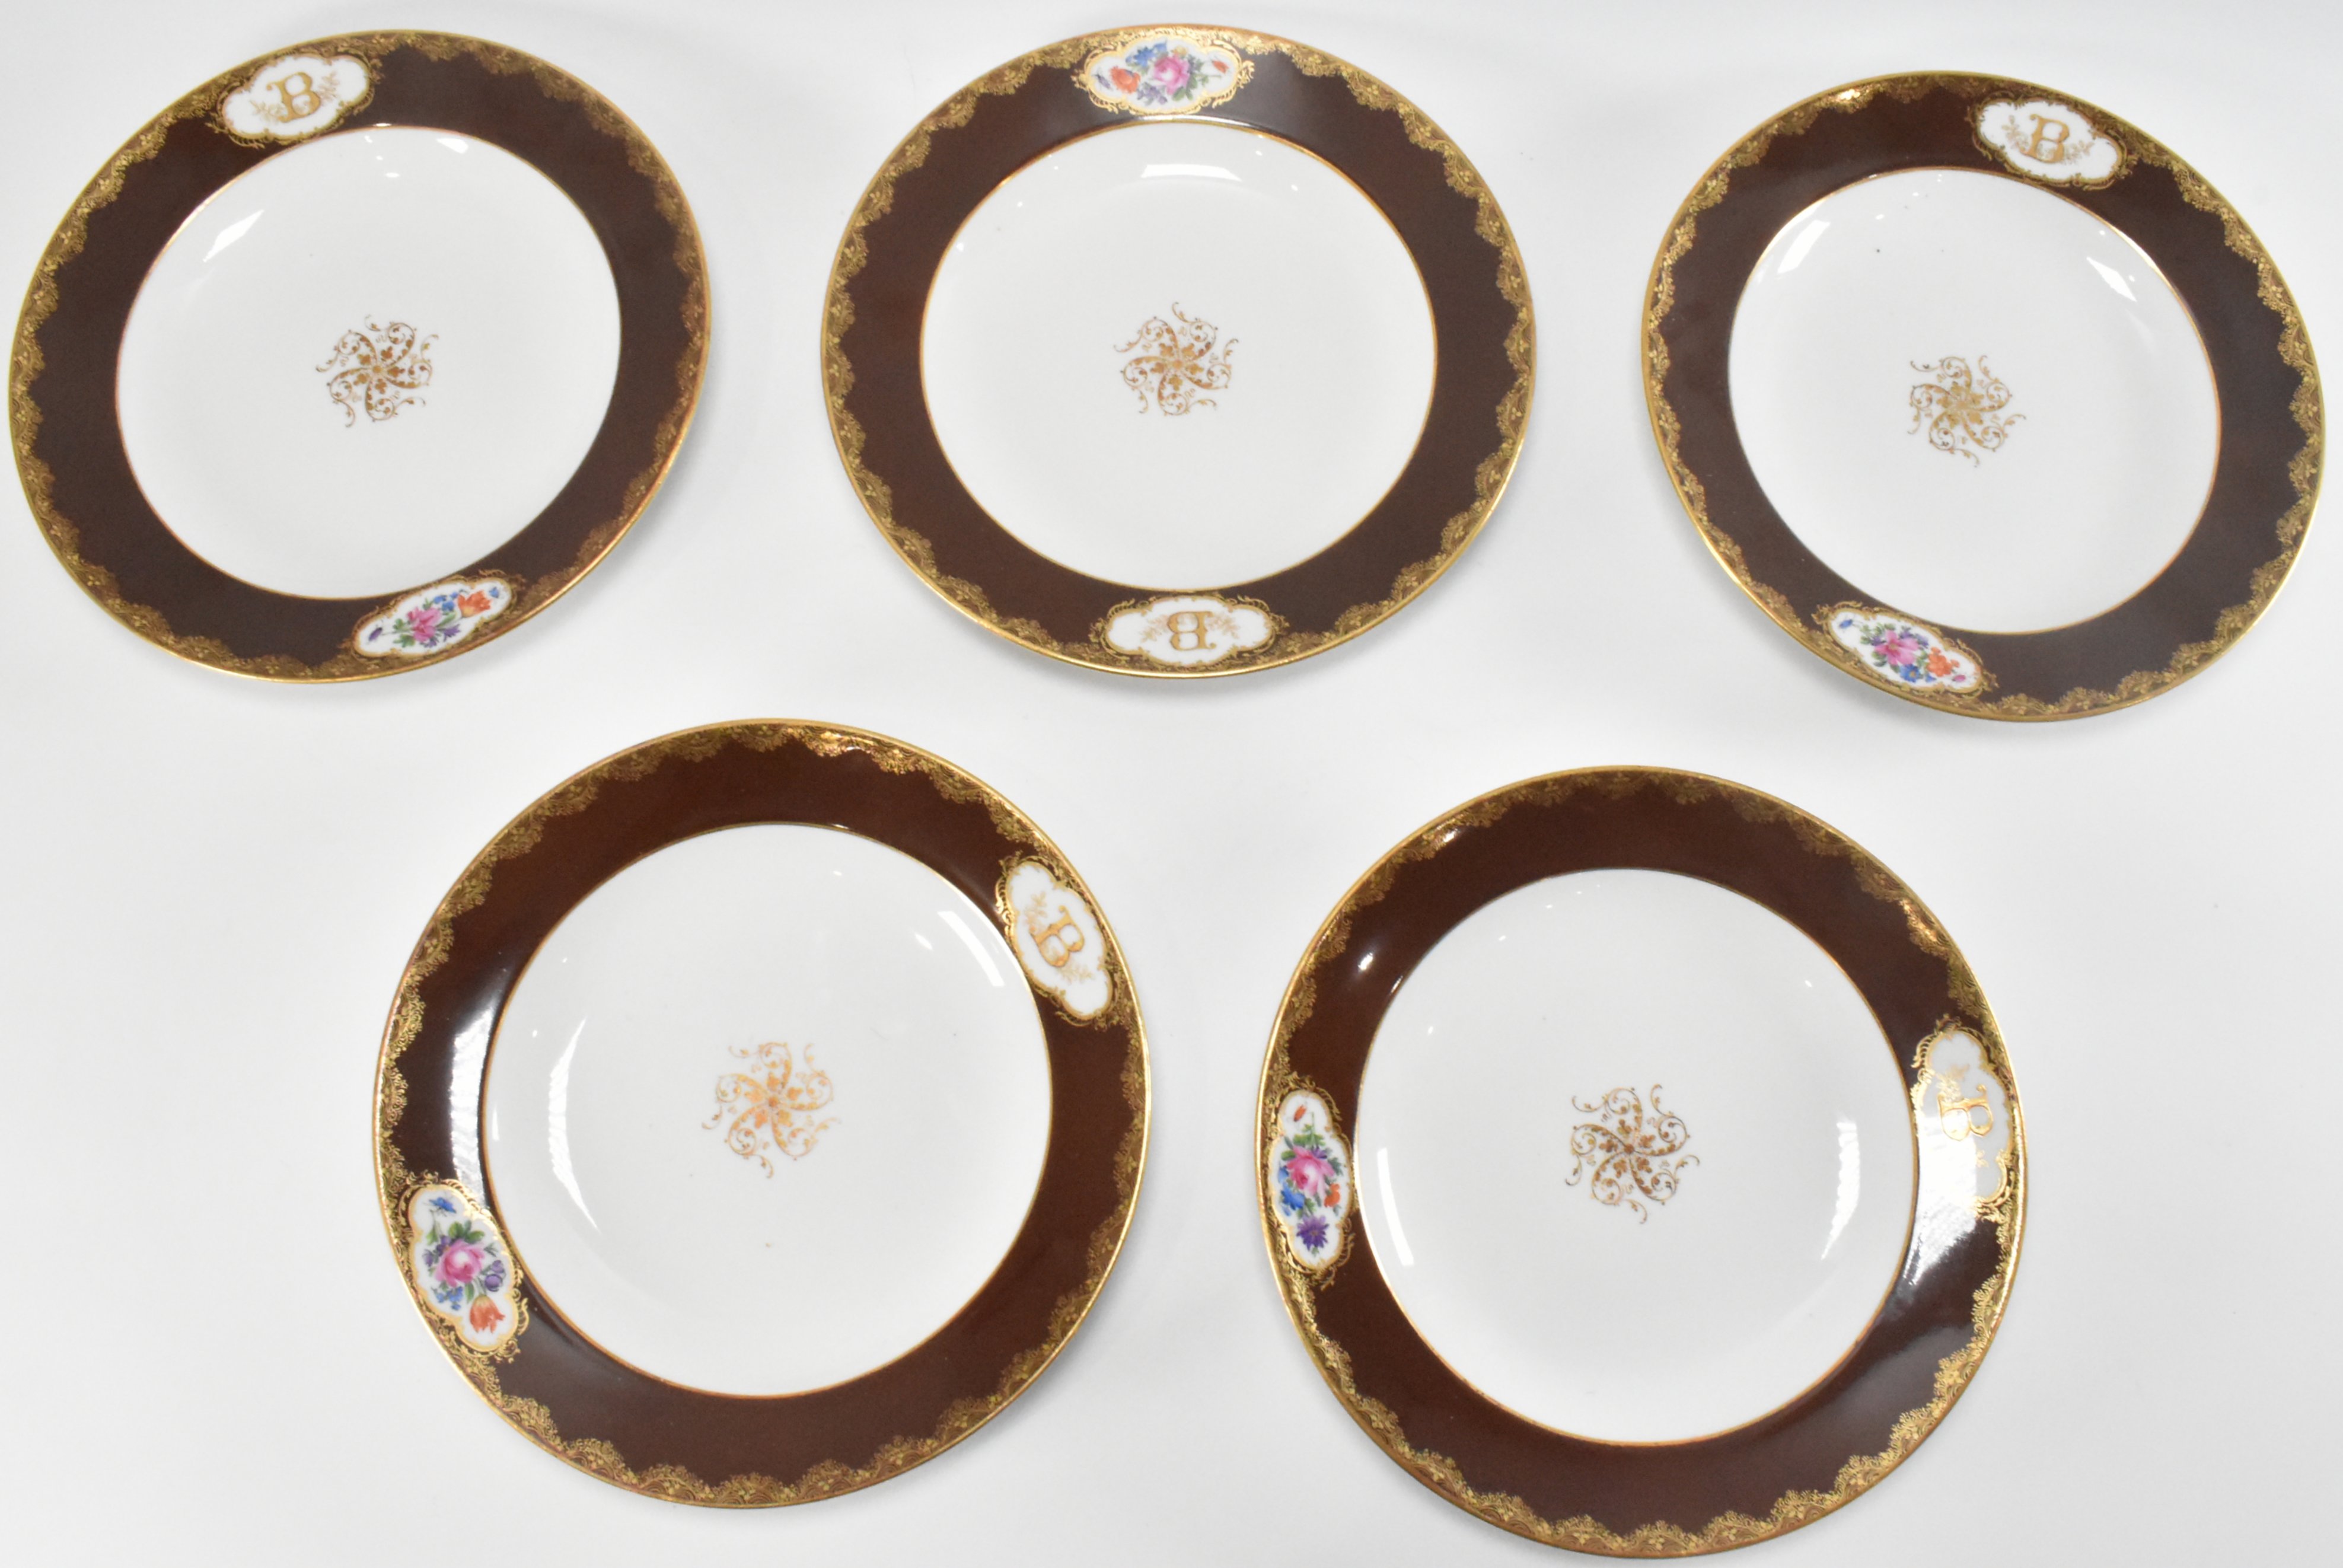 COLLECTION OF FIVE MEISSEN PORCELAIN HAND PAINTED PLATES